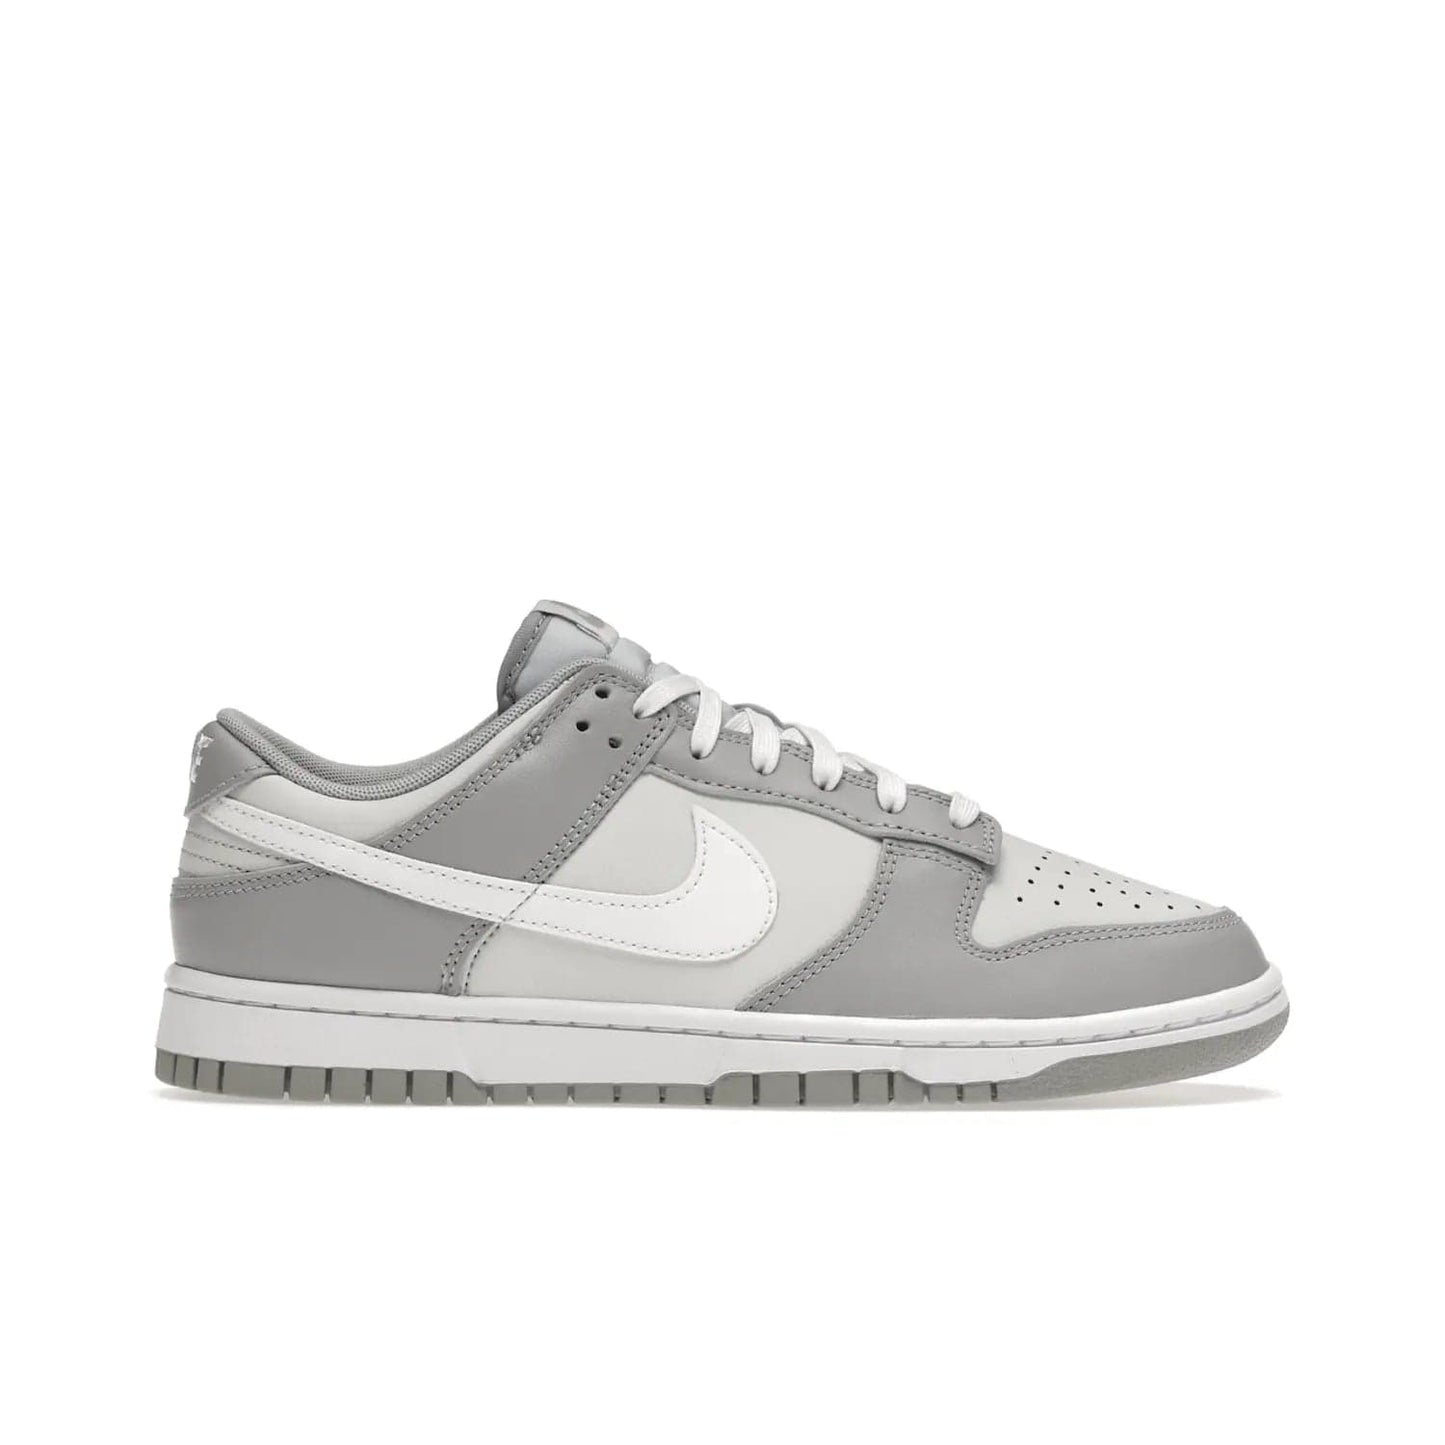 Nike Dunk Low Two Tone Grey - Image 1 - Only at www.BallersClubKickz.com - Fresh Nike Dunk Low Two Tone Grey leather/overlay Sneaker. White Swoosh detailing, nylon tongue, woven label and Air Sole. Get yours and stay on the trend.